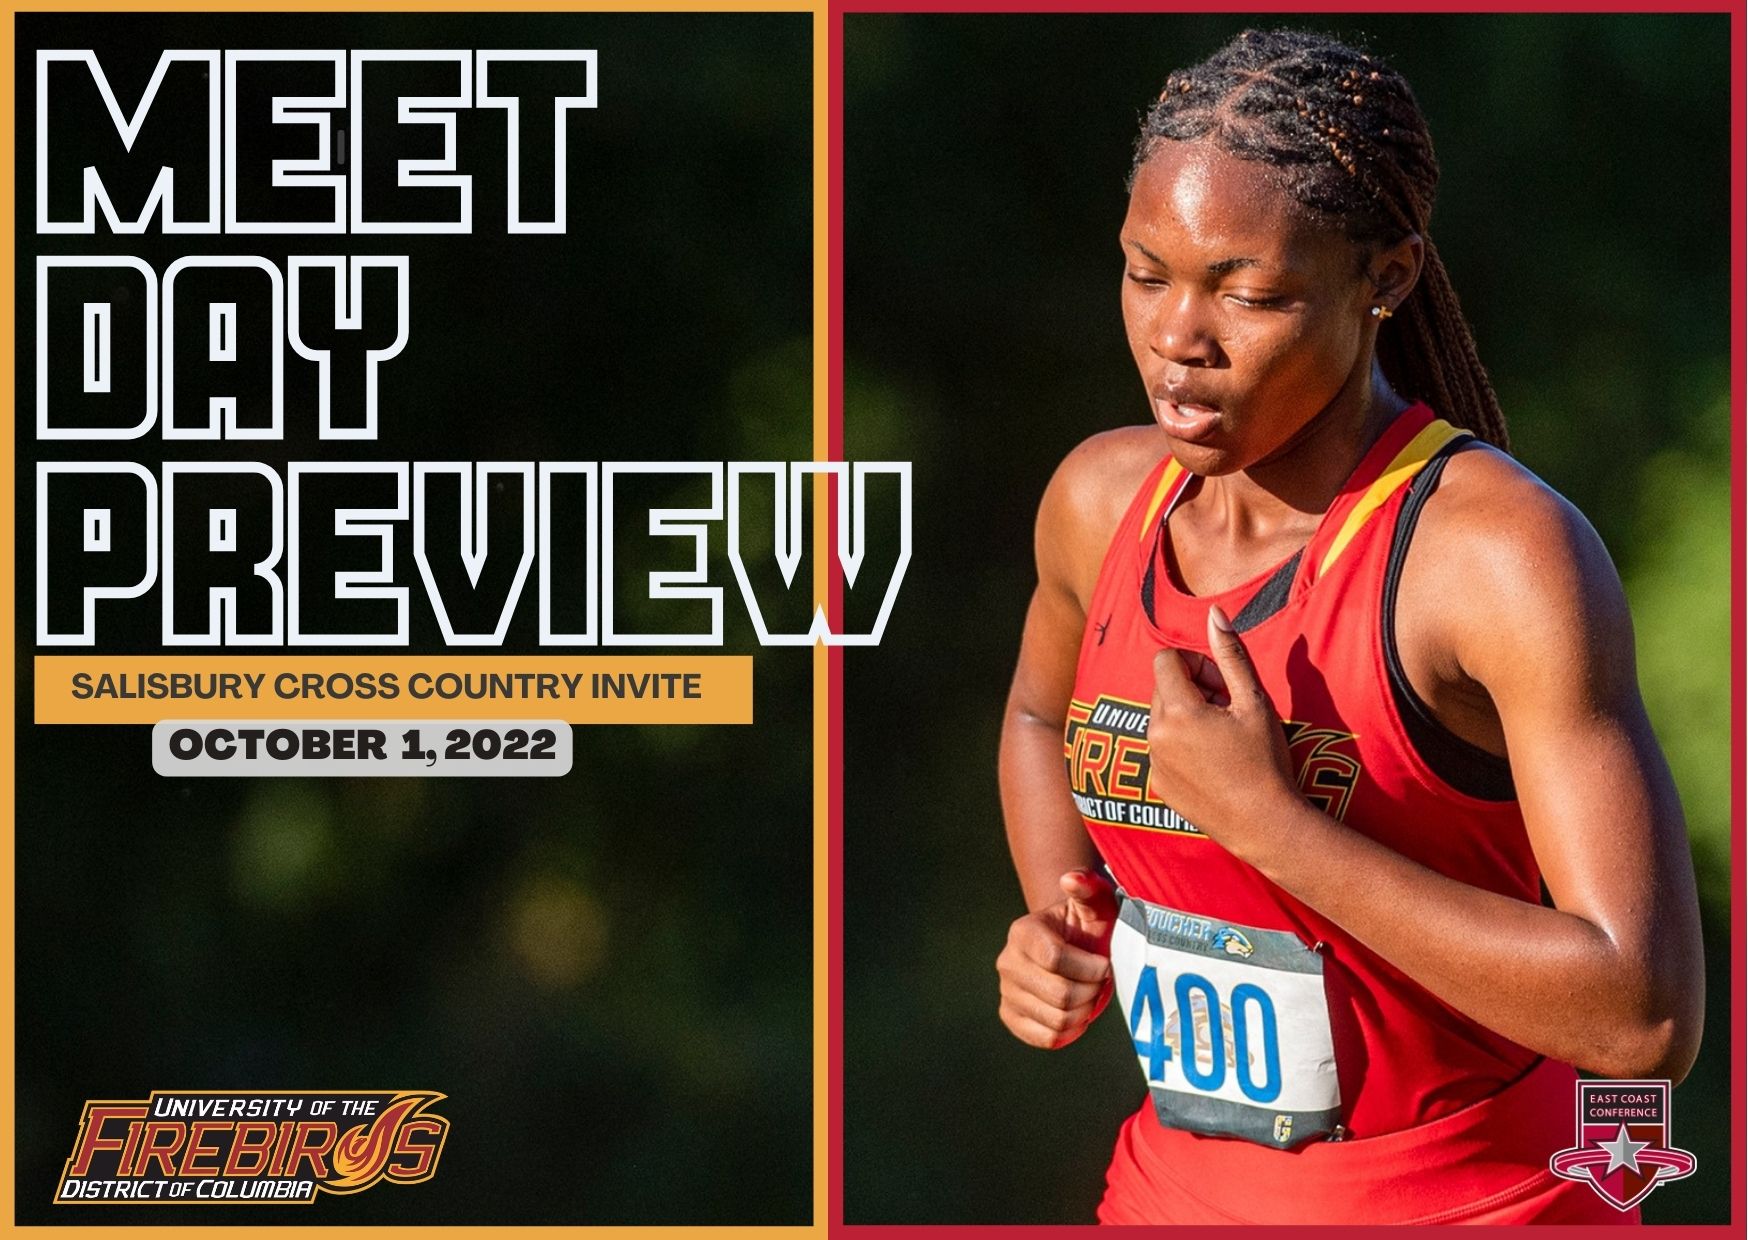 MEET DAY PREVIEW: WOMEN'S CROSS COUNTRY